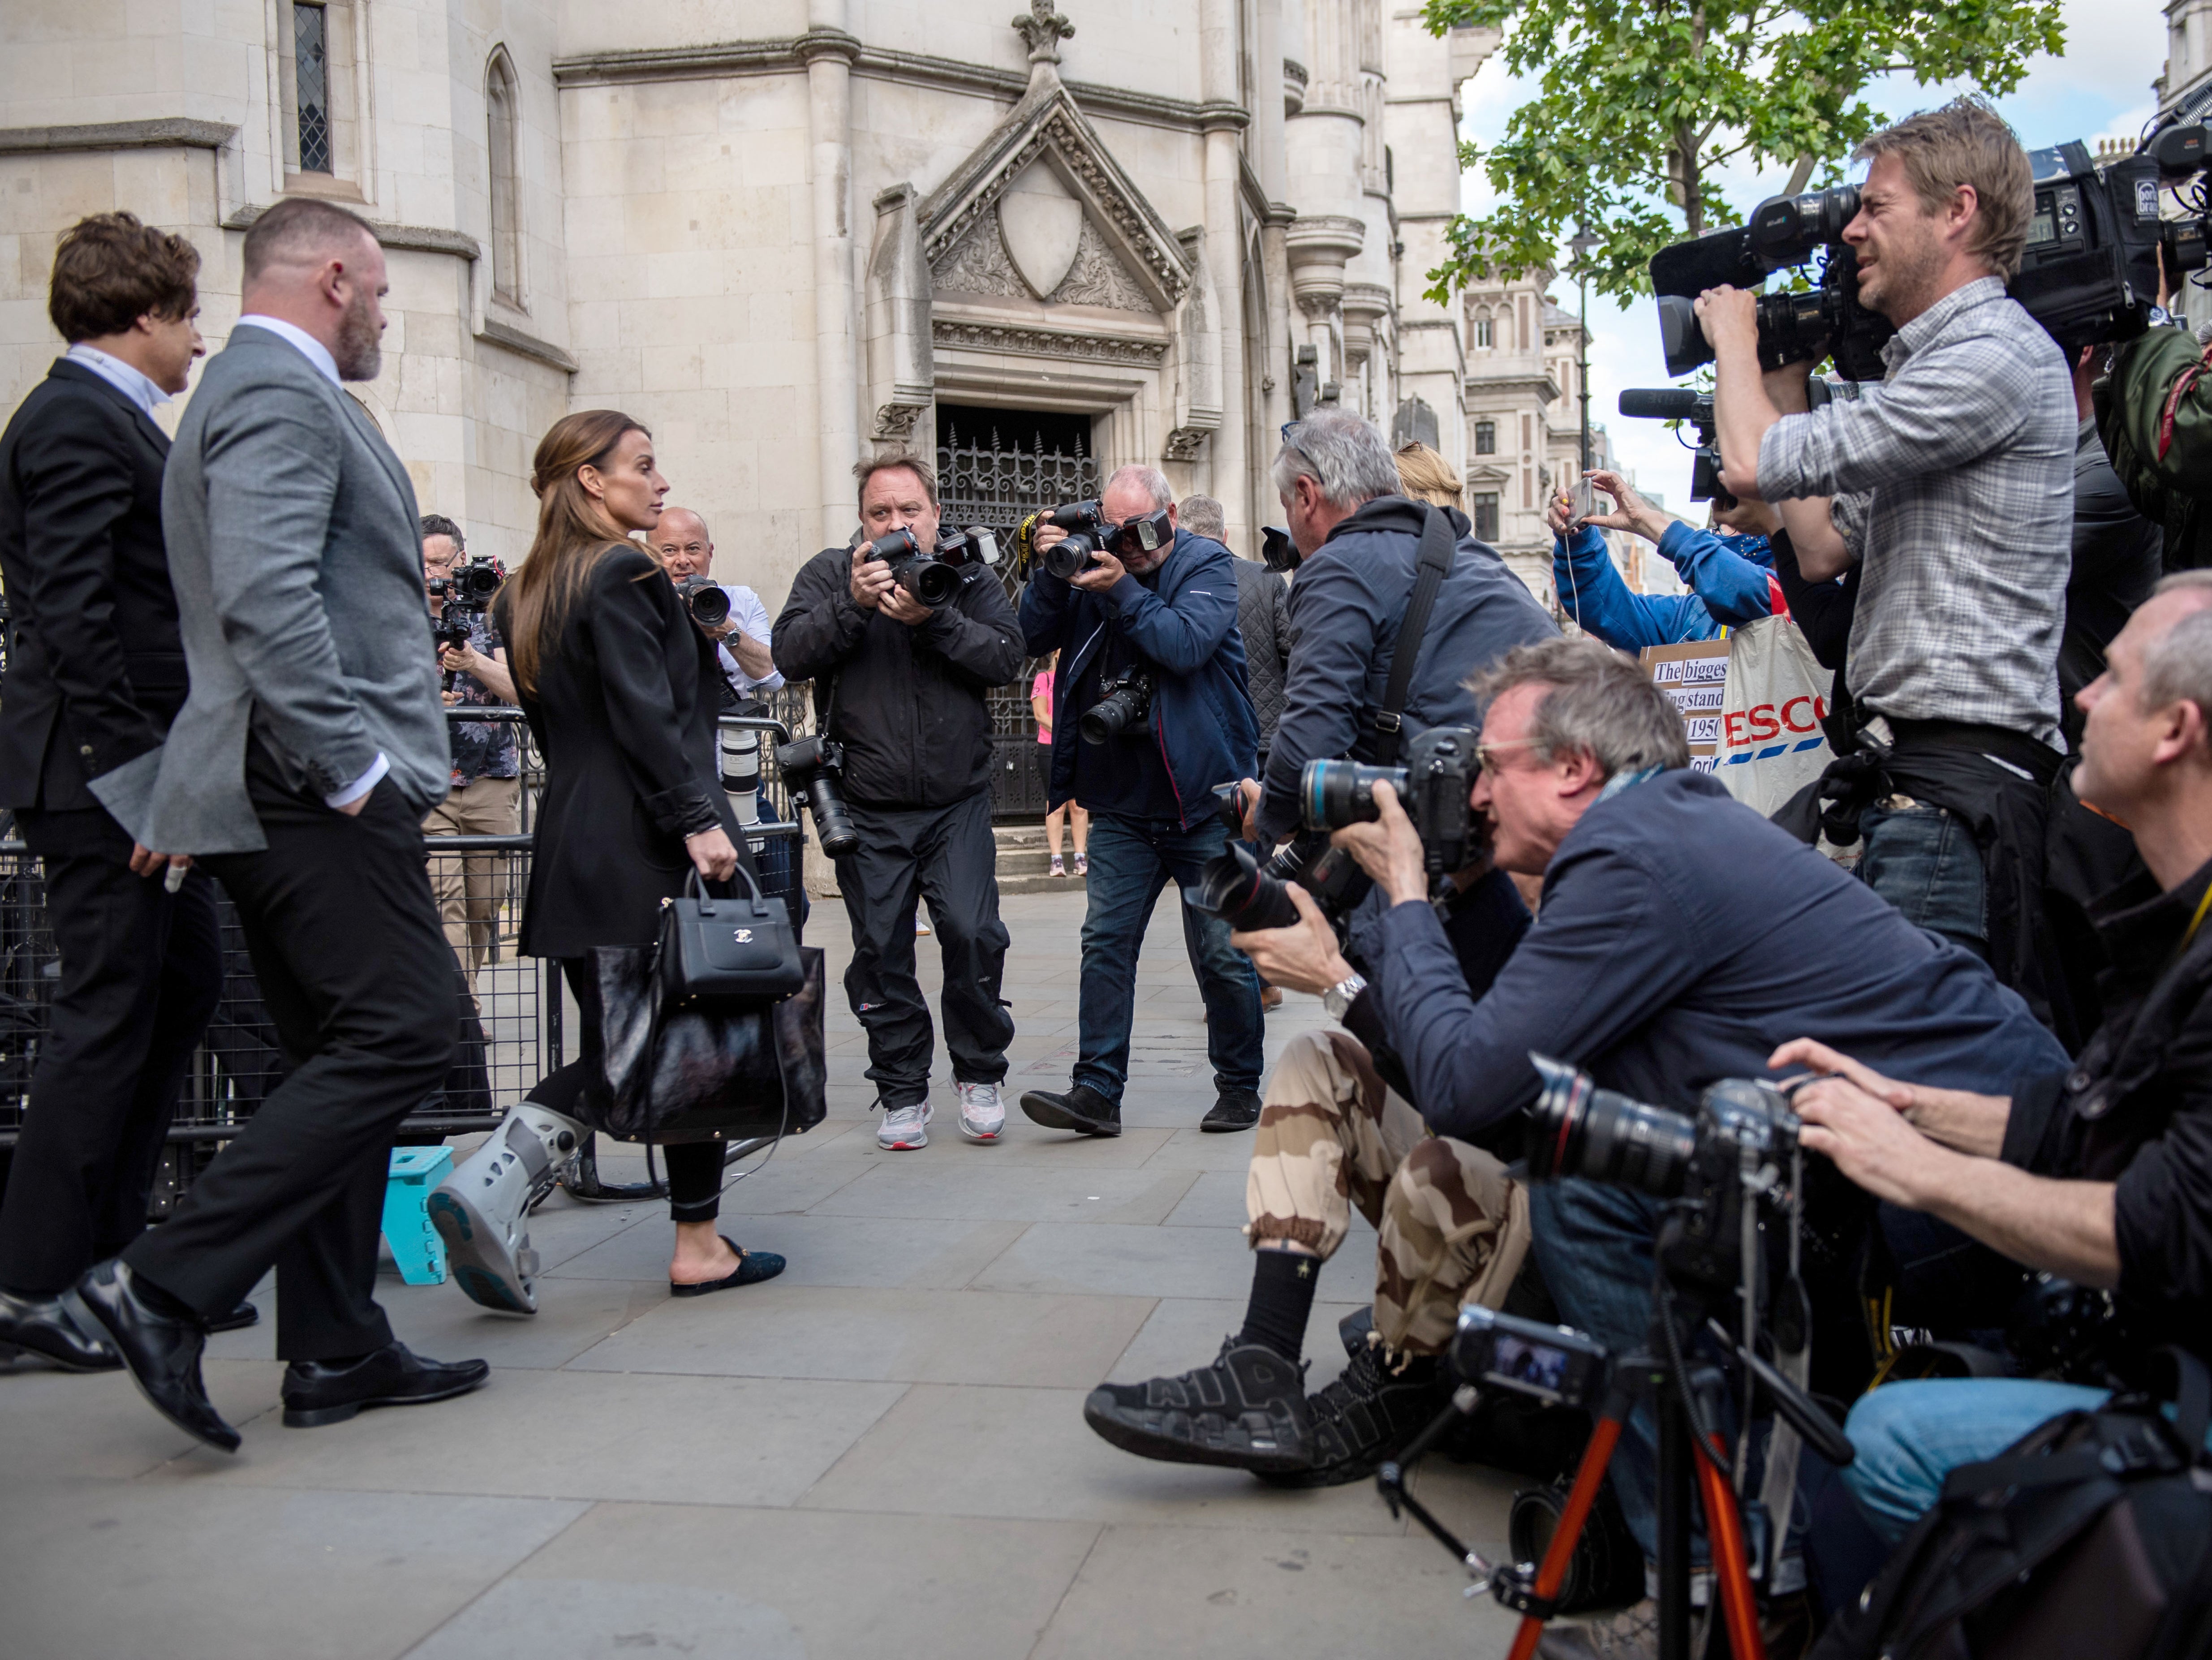 Members of the press photograph and film Coleen Rooney and her husband Wayne Rooney leaving the Royal Courts of Justice on Tuesday